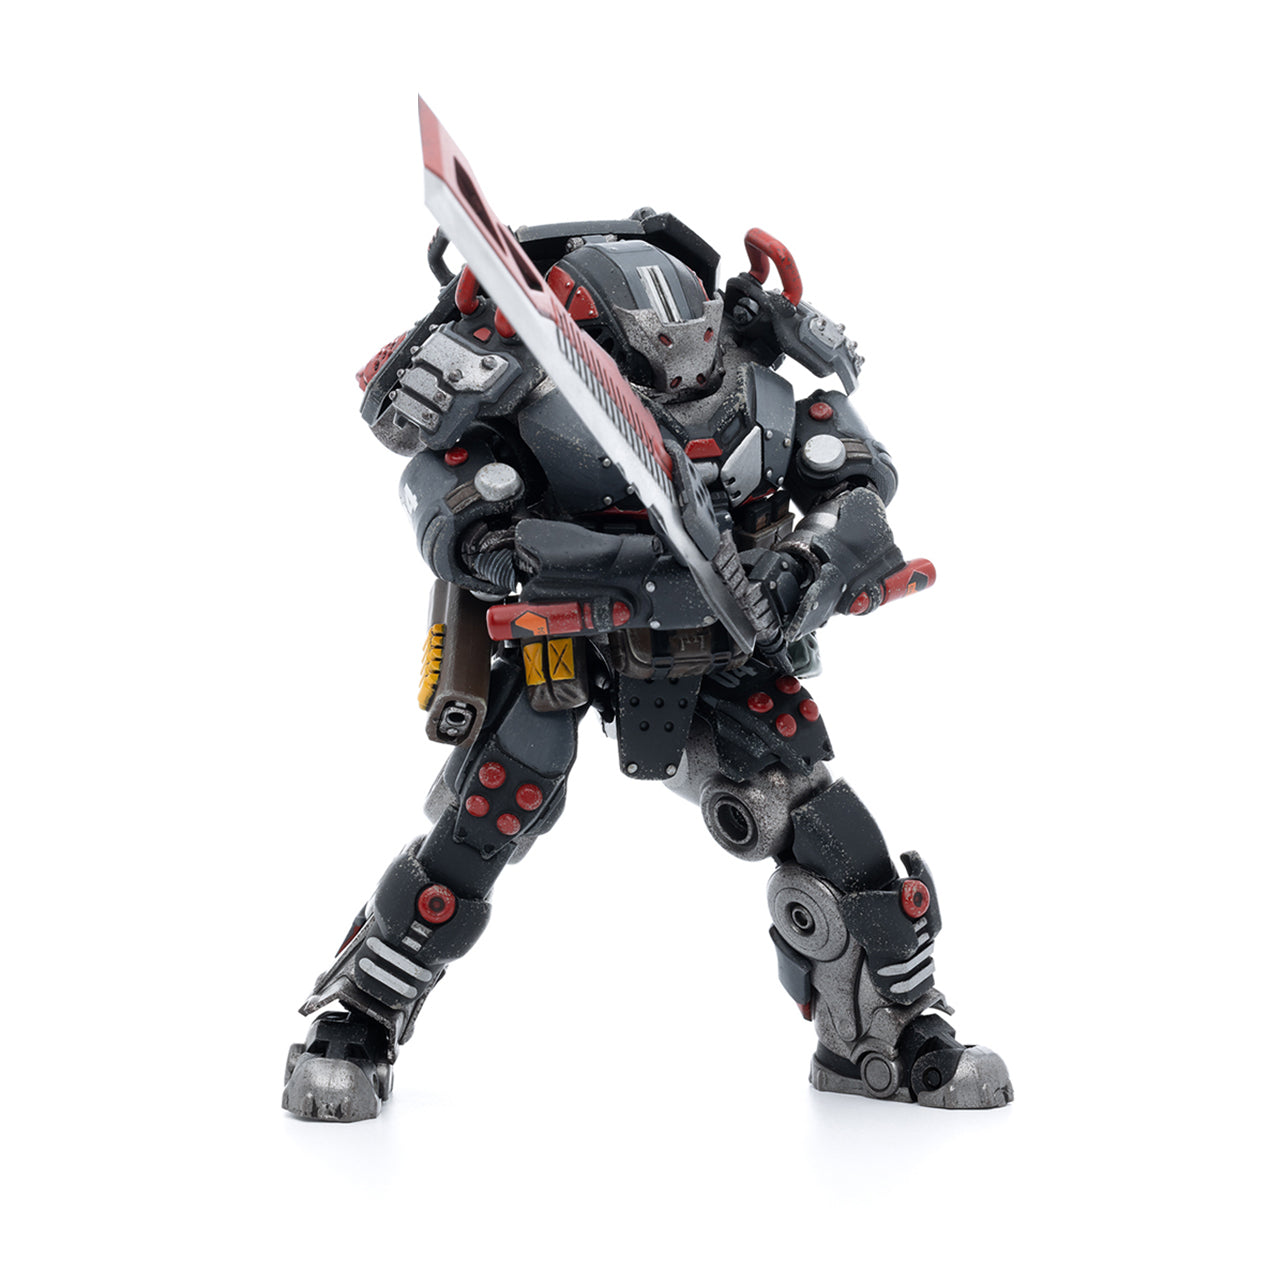 Sorrow Expeditionary Forces Obsidian Iron Knight Assaulter